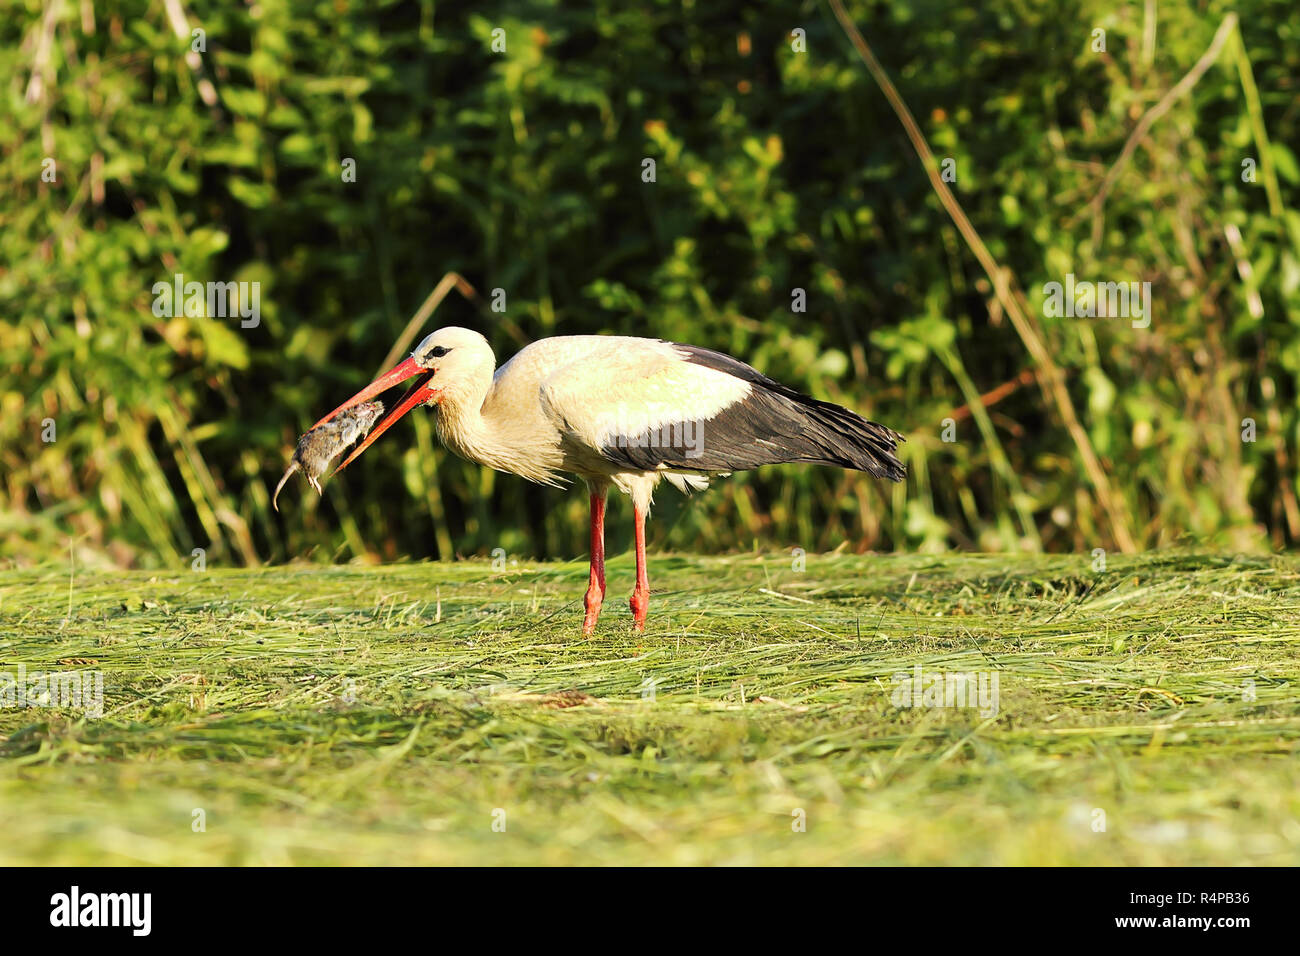 hungry white stork eating rat ( Ciconia ciconia ) Stock Photo